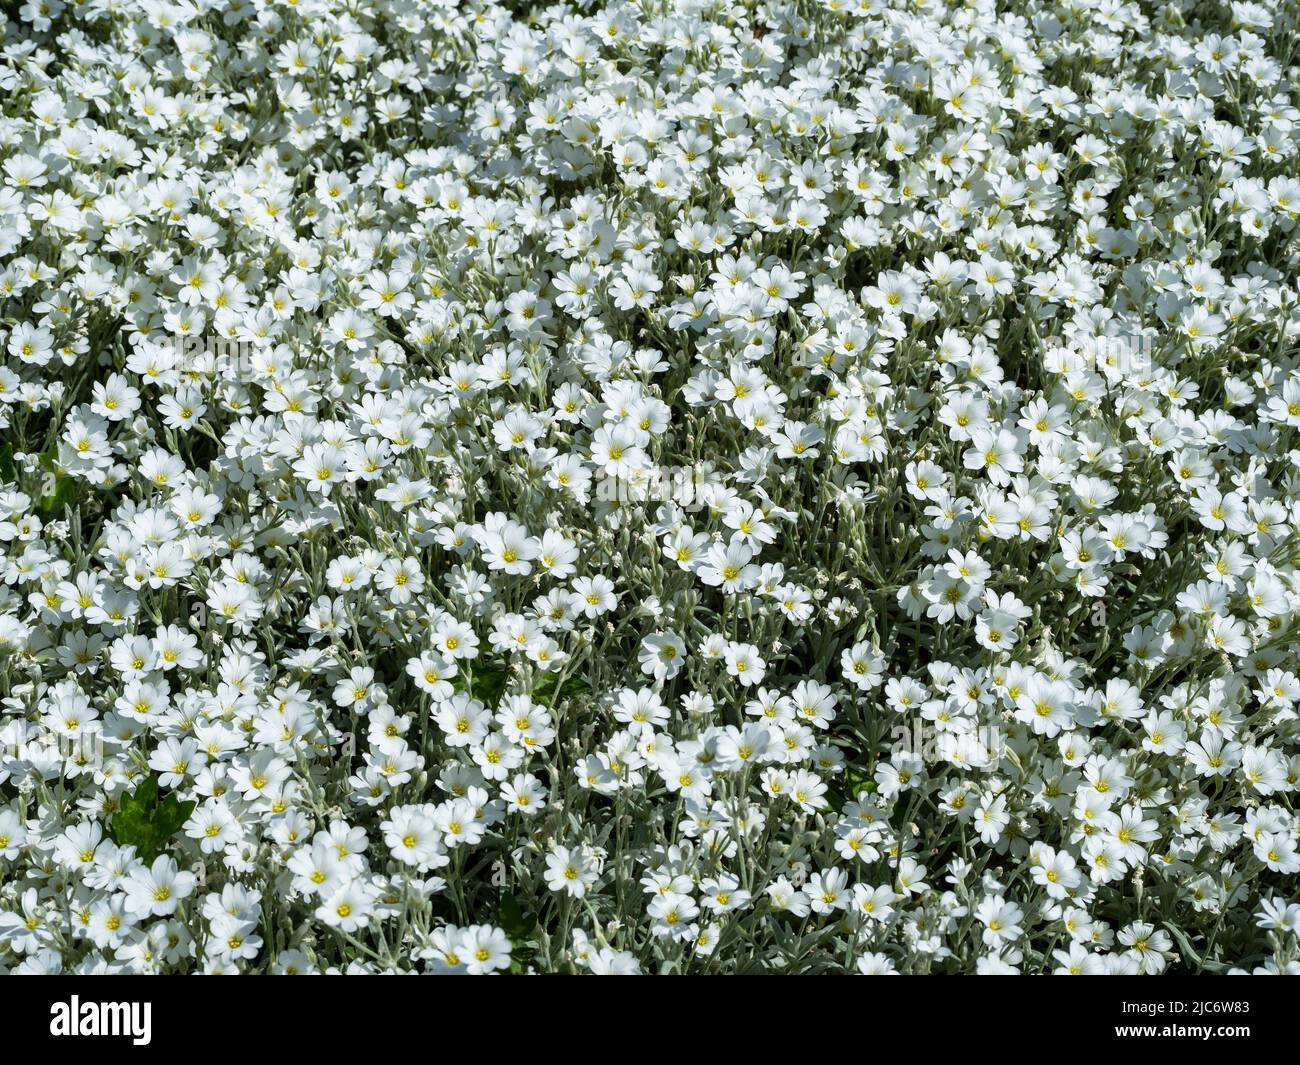 White snow in summer flowers seen from above Stock Photo